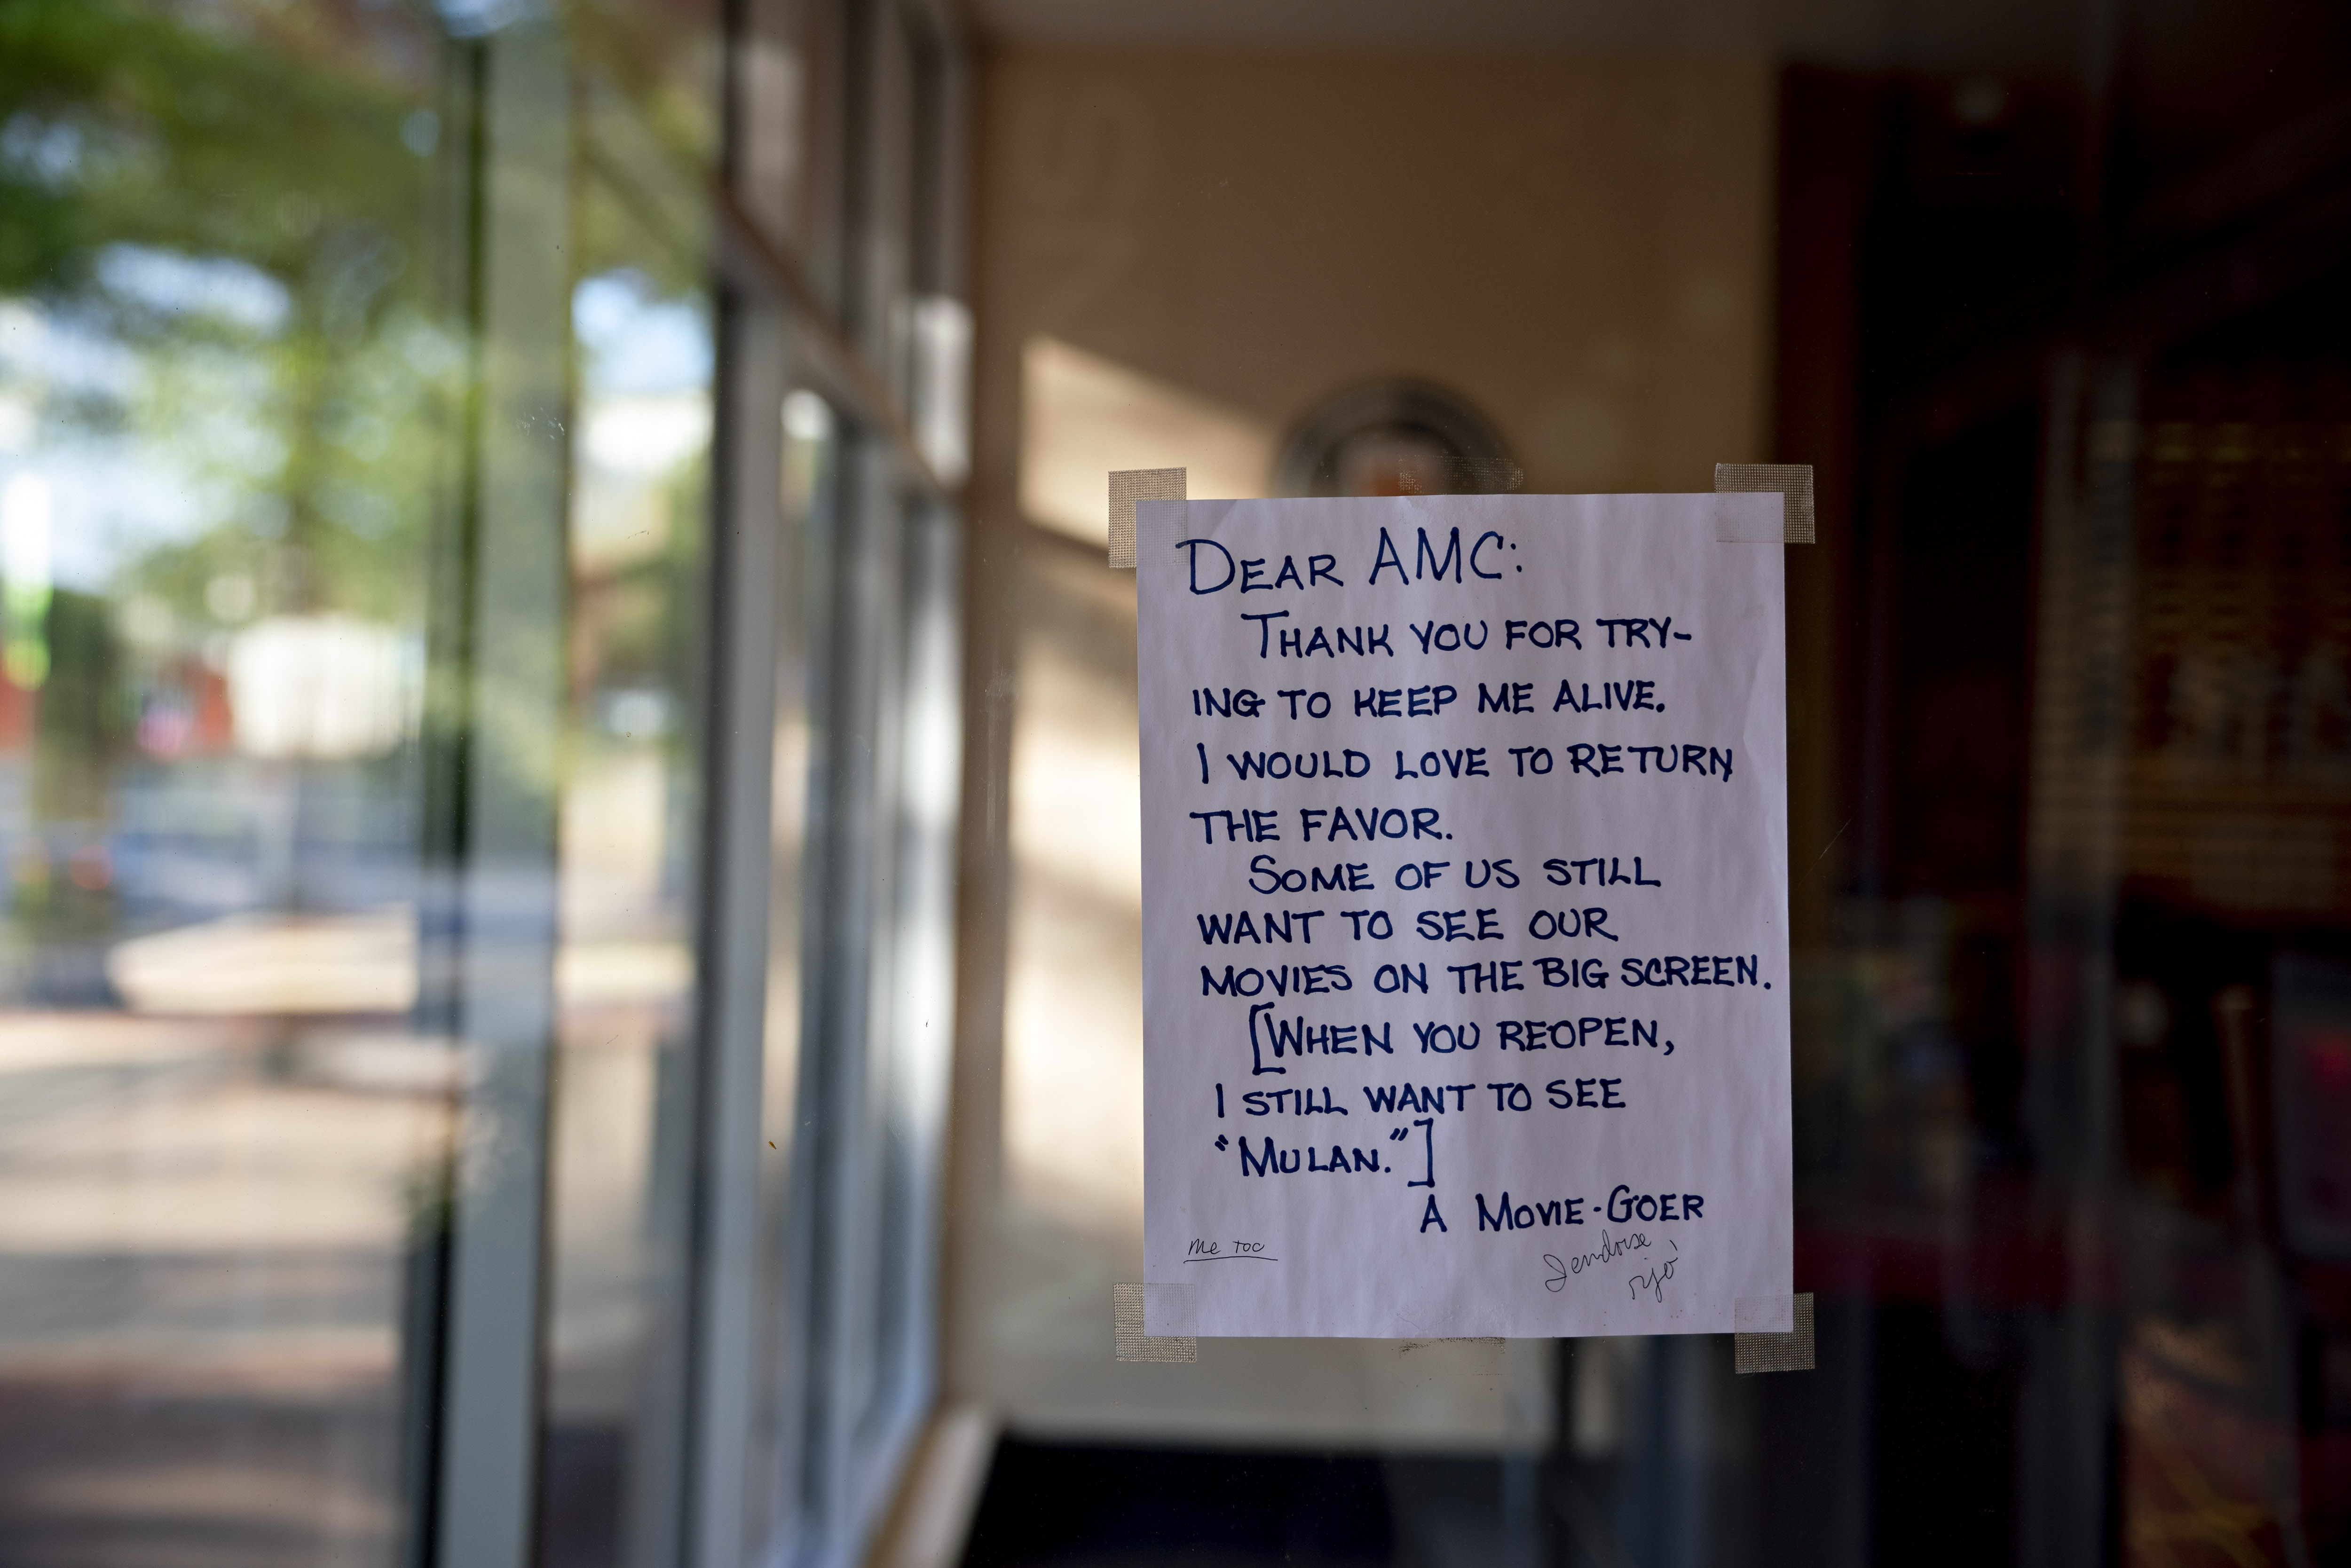 A hand-written letter by a Movie-Goer hangs on the window of an AMC Entertainment Holdings Inc. movie theater in Arlington, Virginia, U.S., on Monday, June 8, 2020.